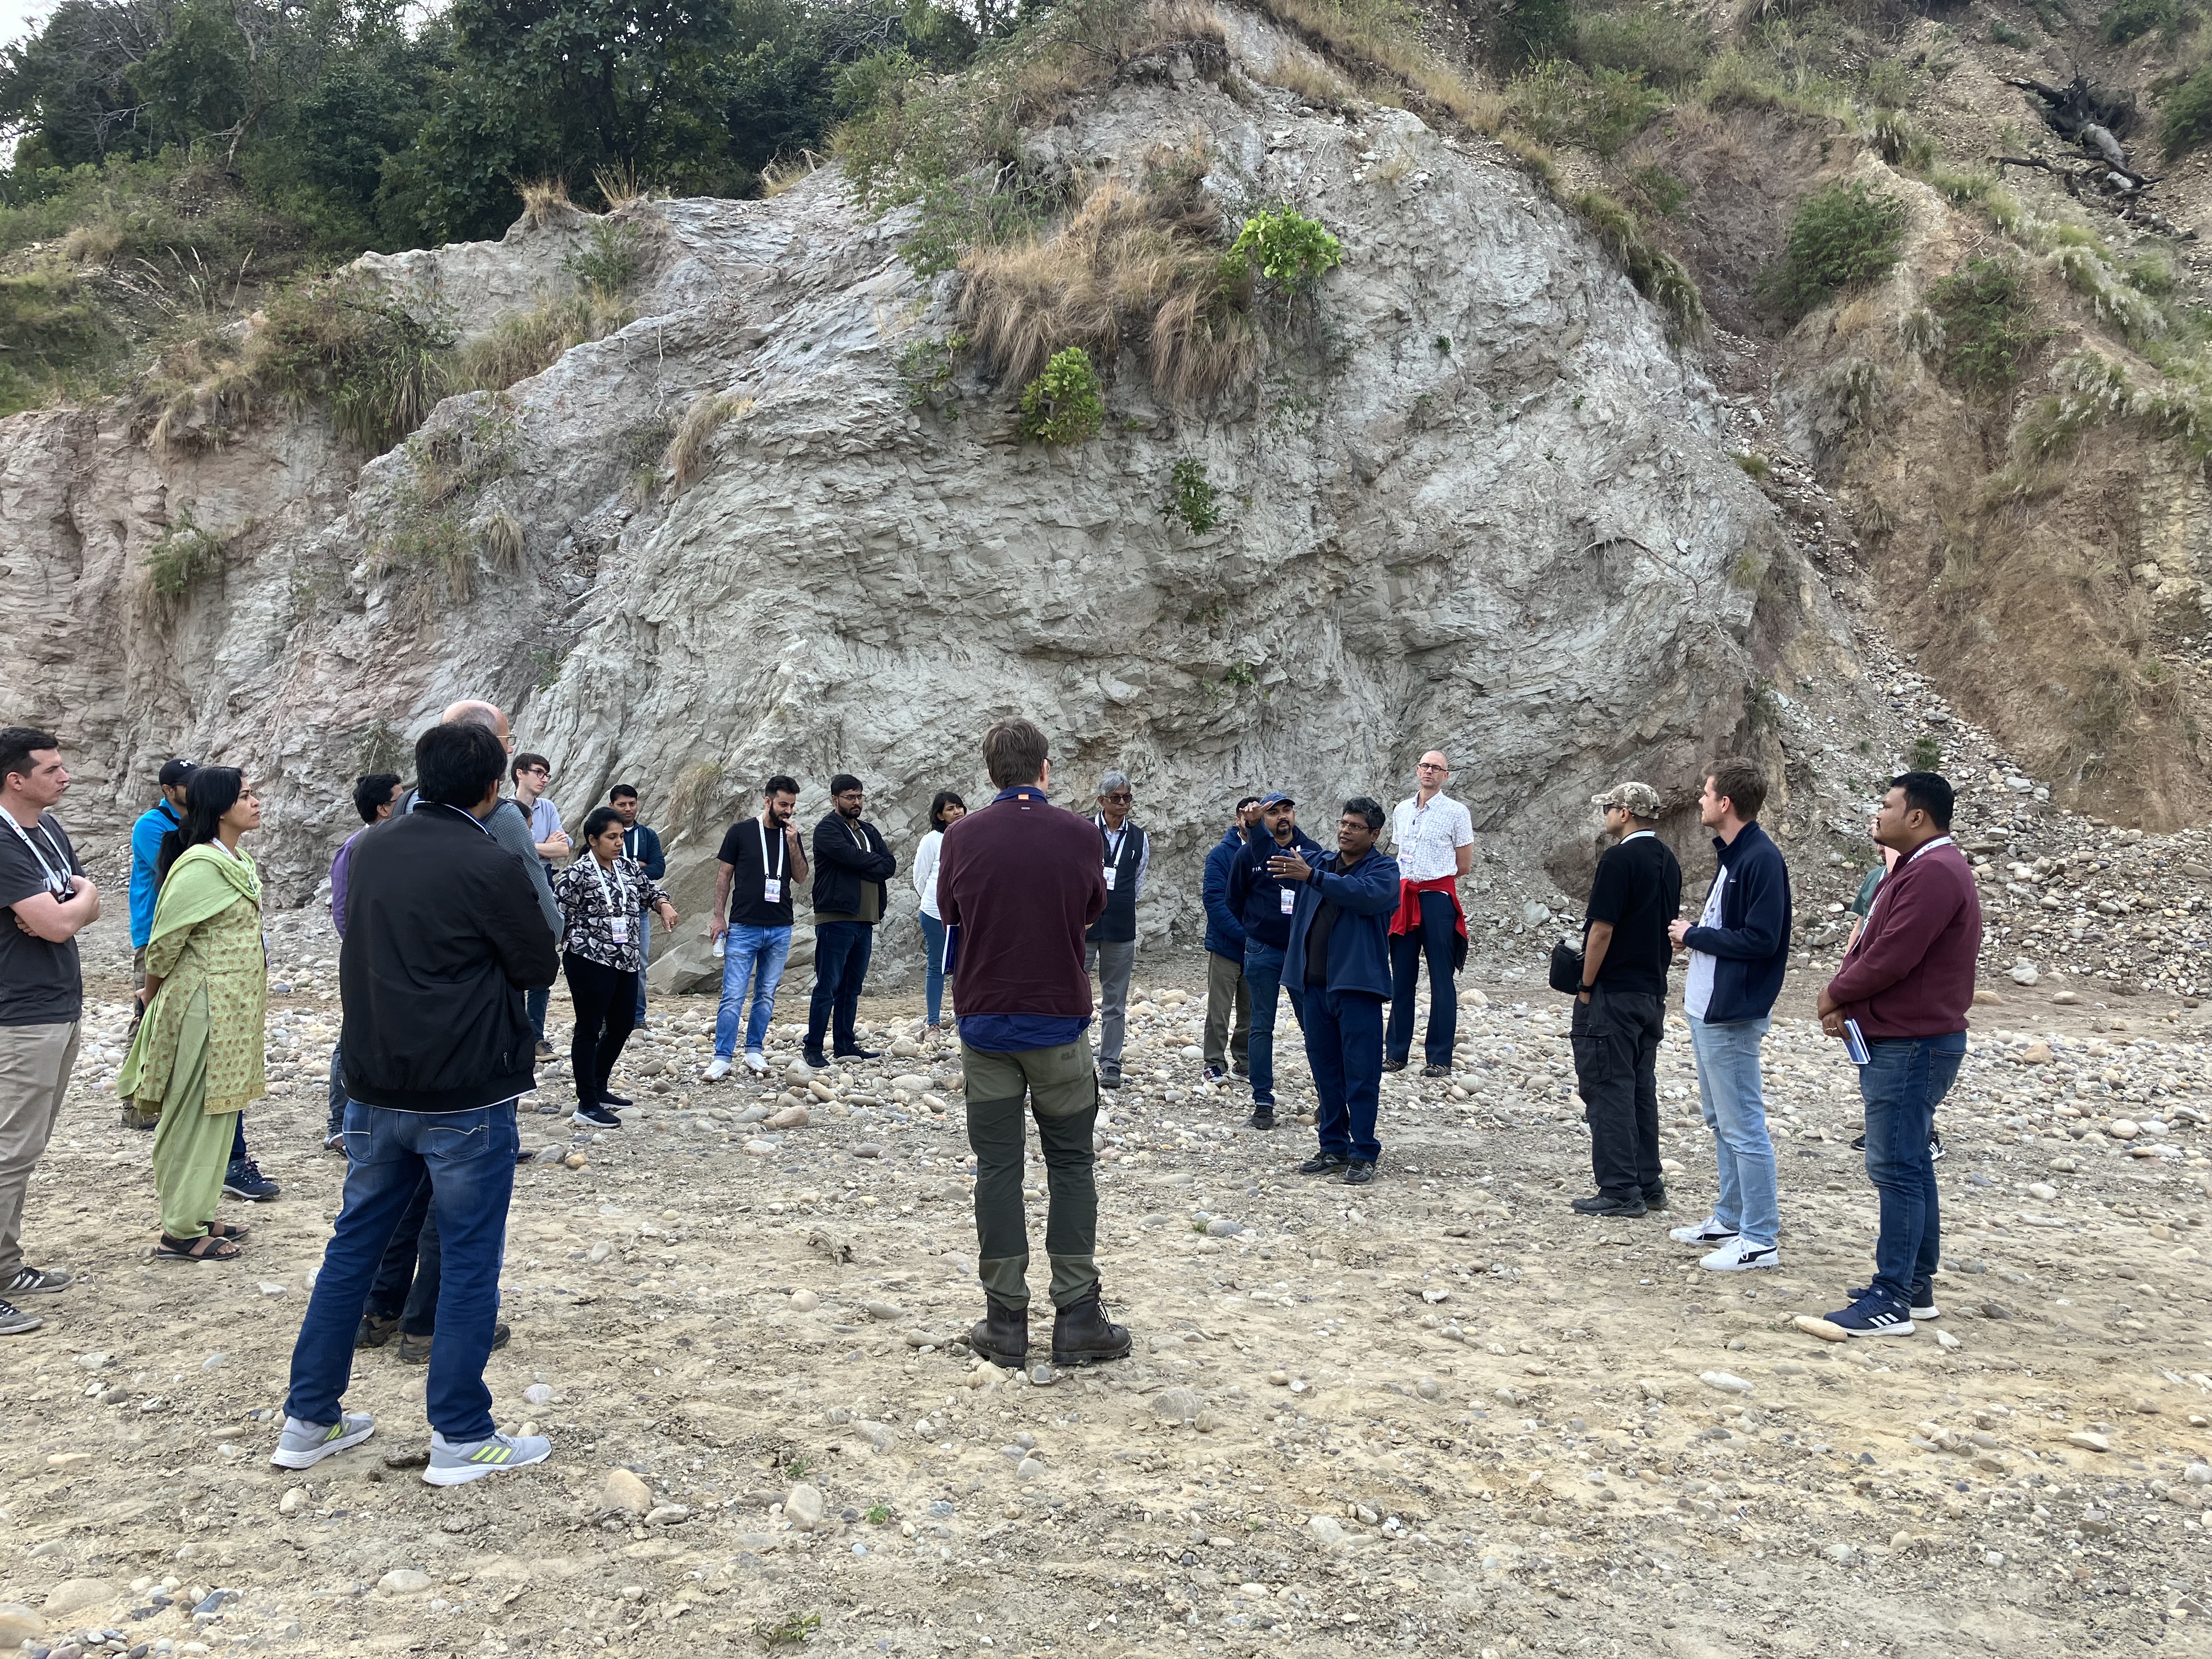 Field visit to the Mohand Anticline